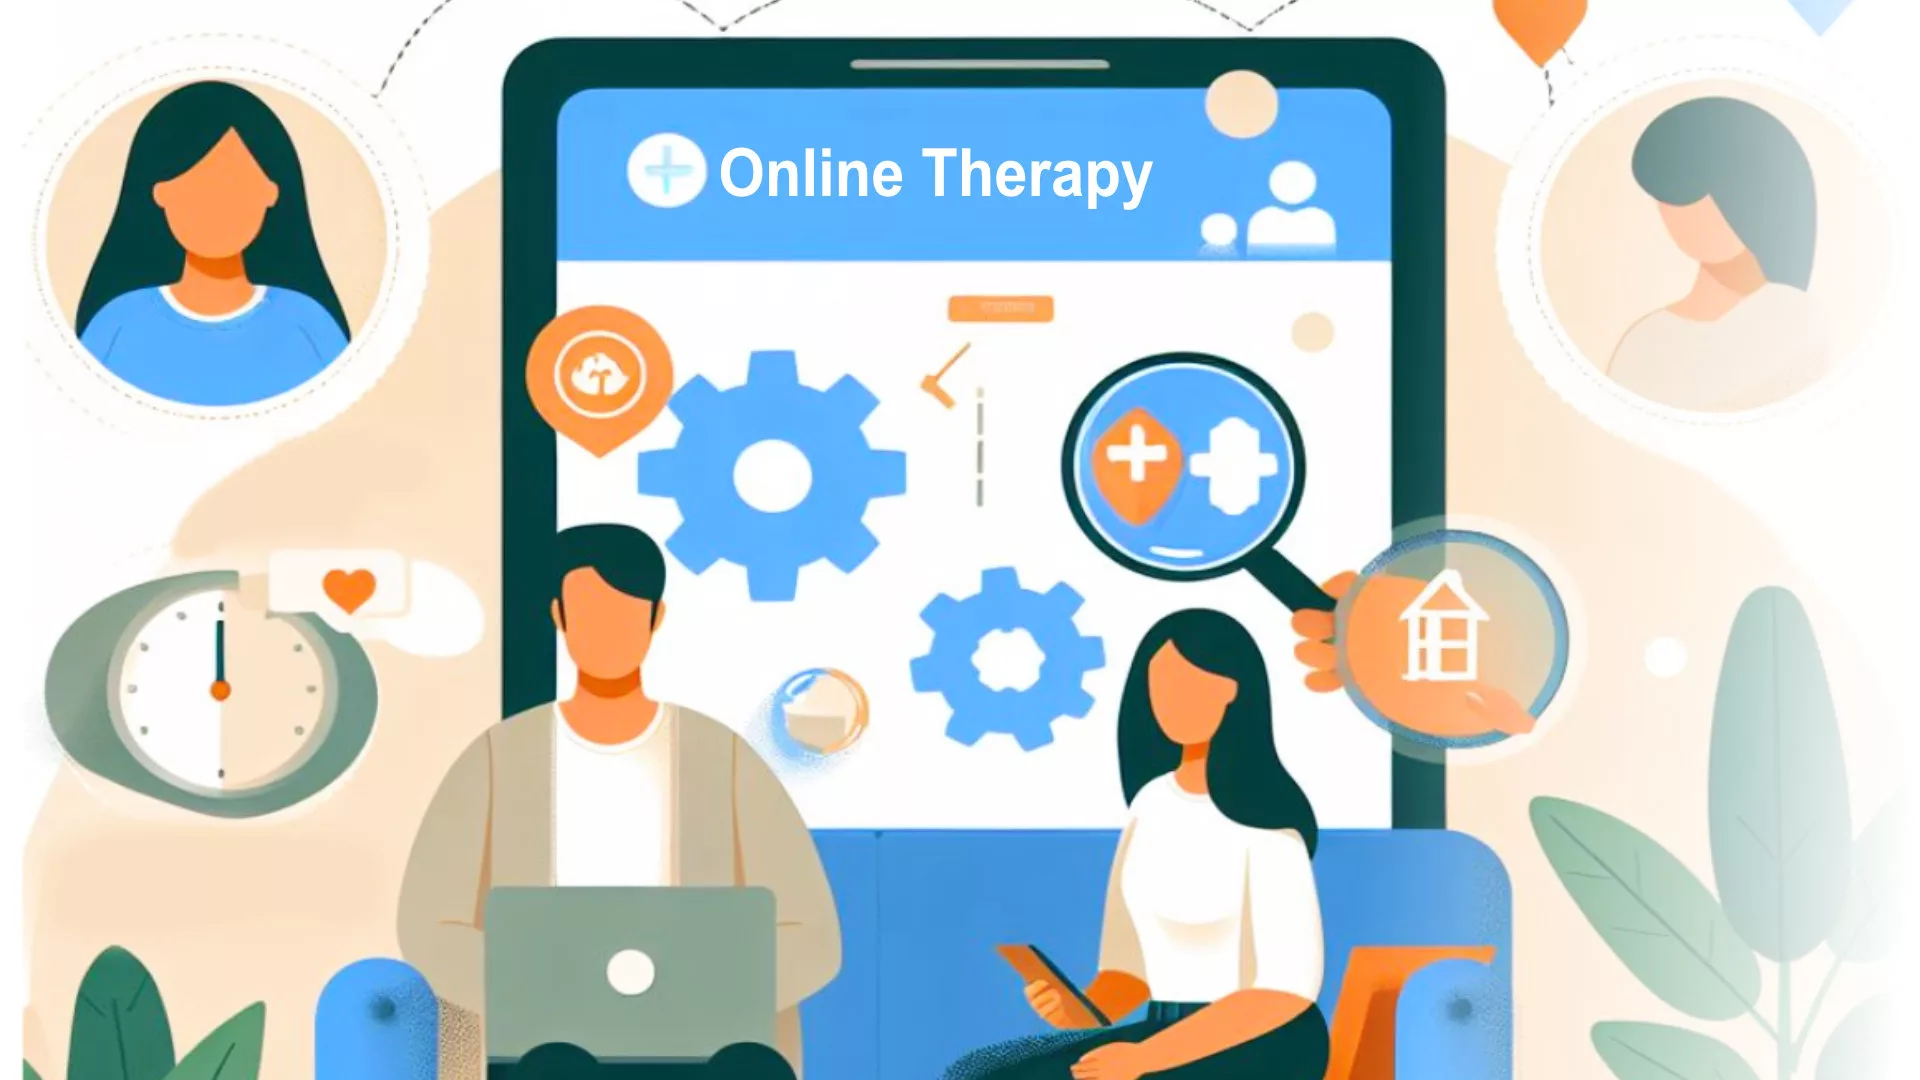 Top 10 Advantages of Online Therapy